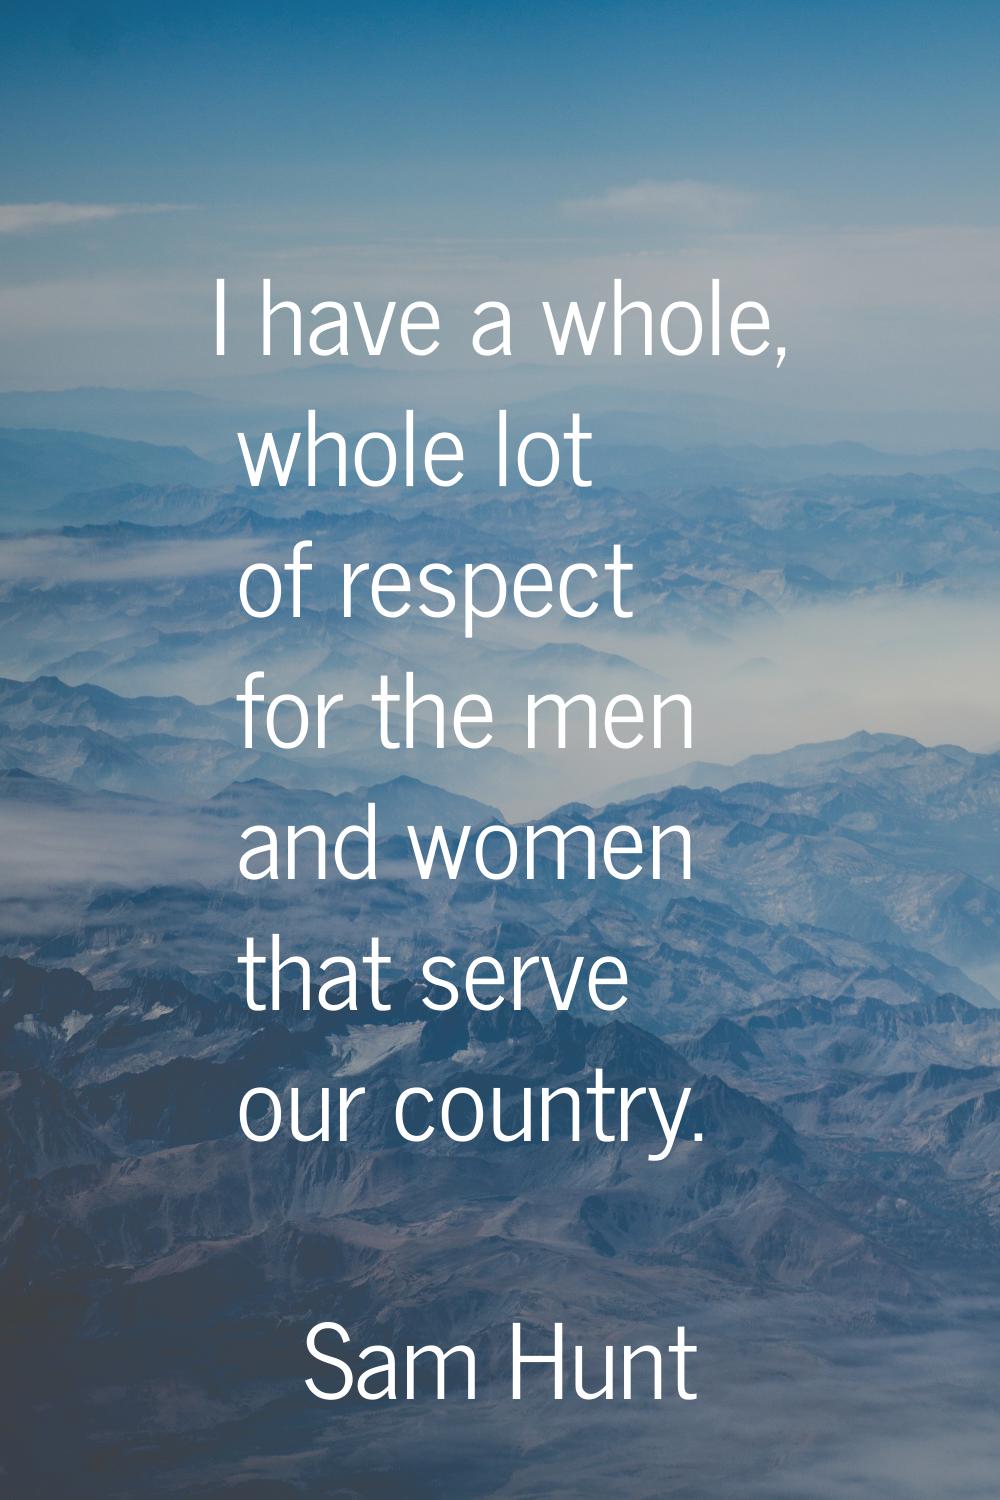 I have a whole, whole lot of respect for the men and women that serve our country.